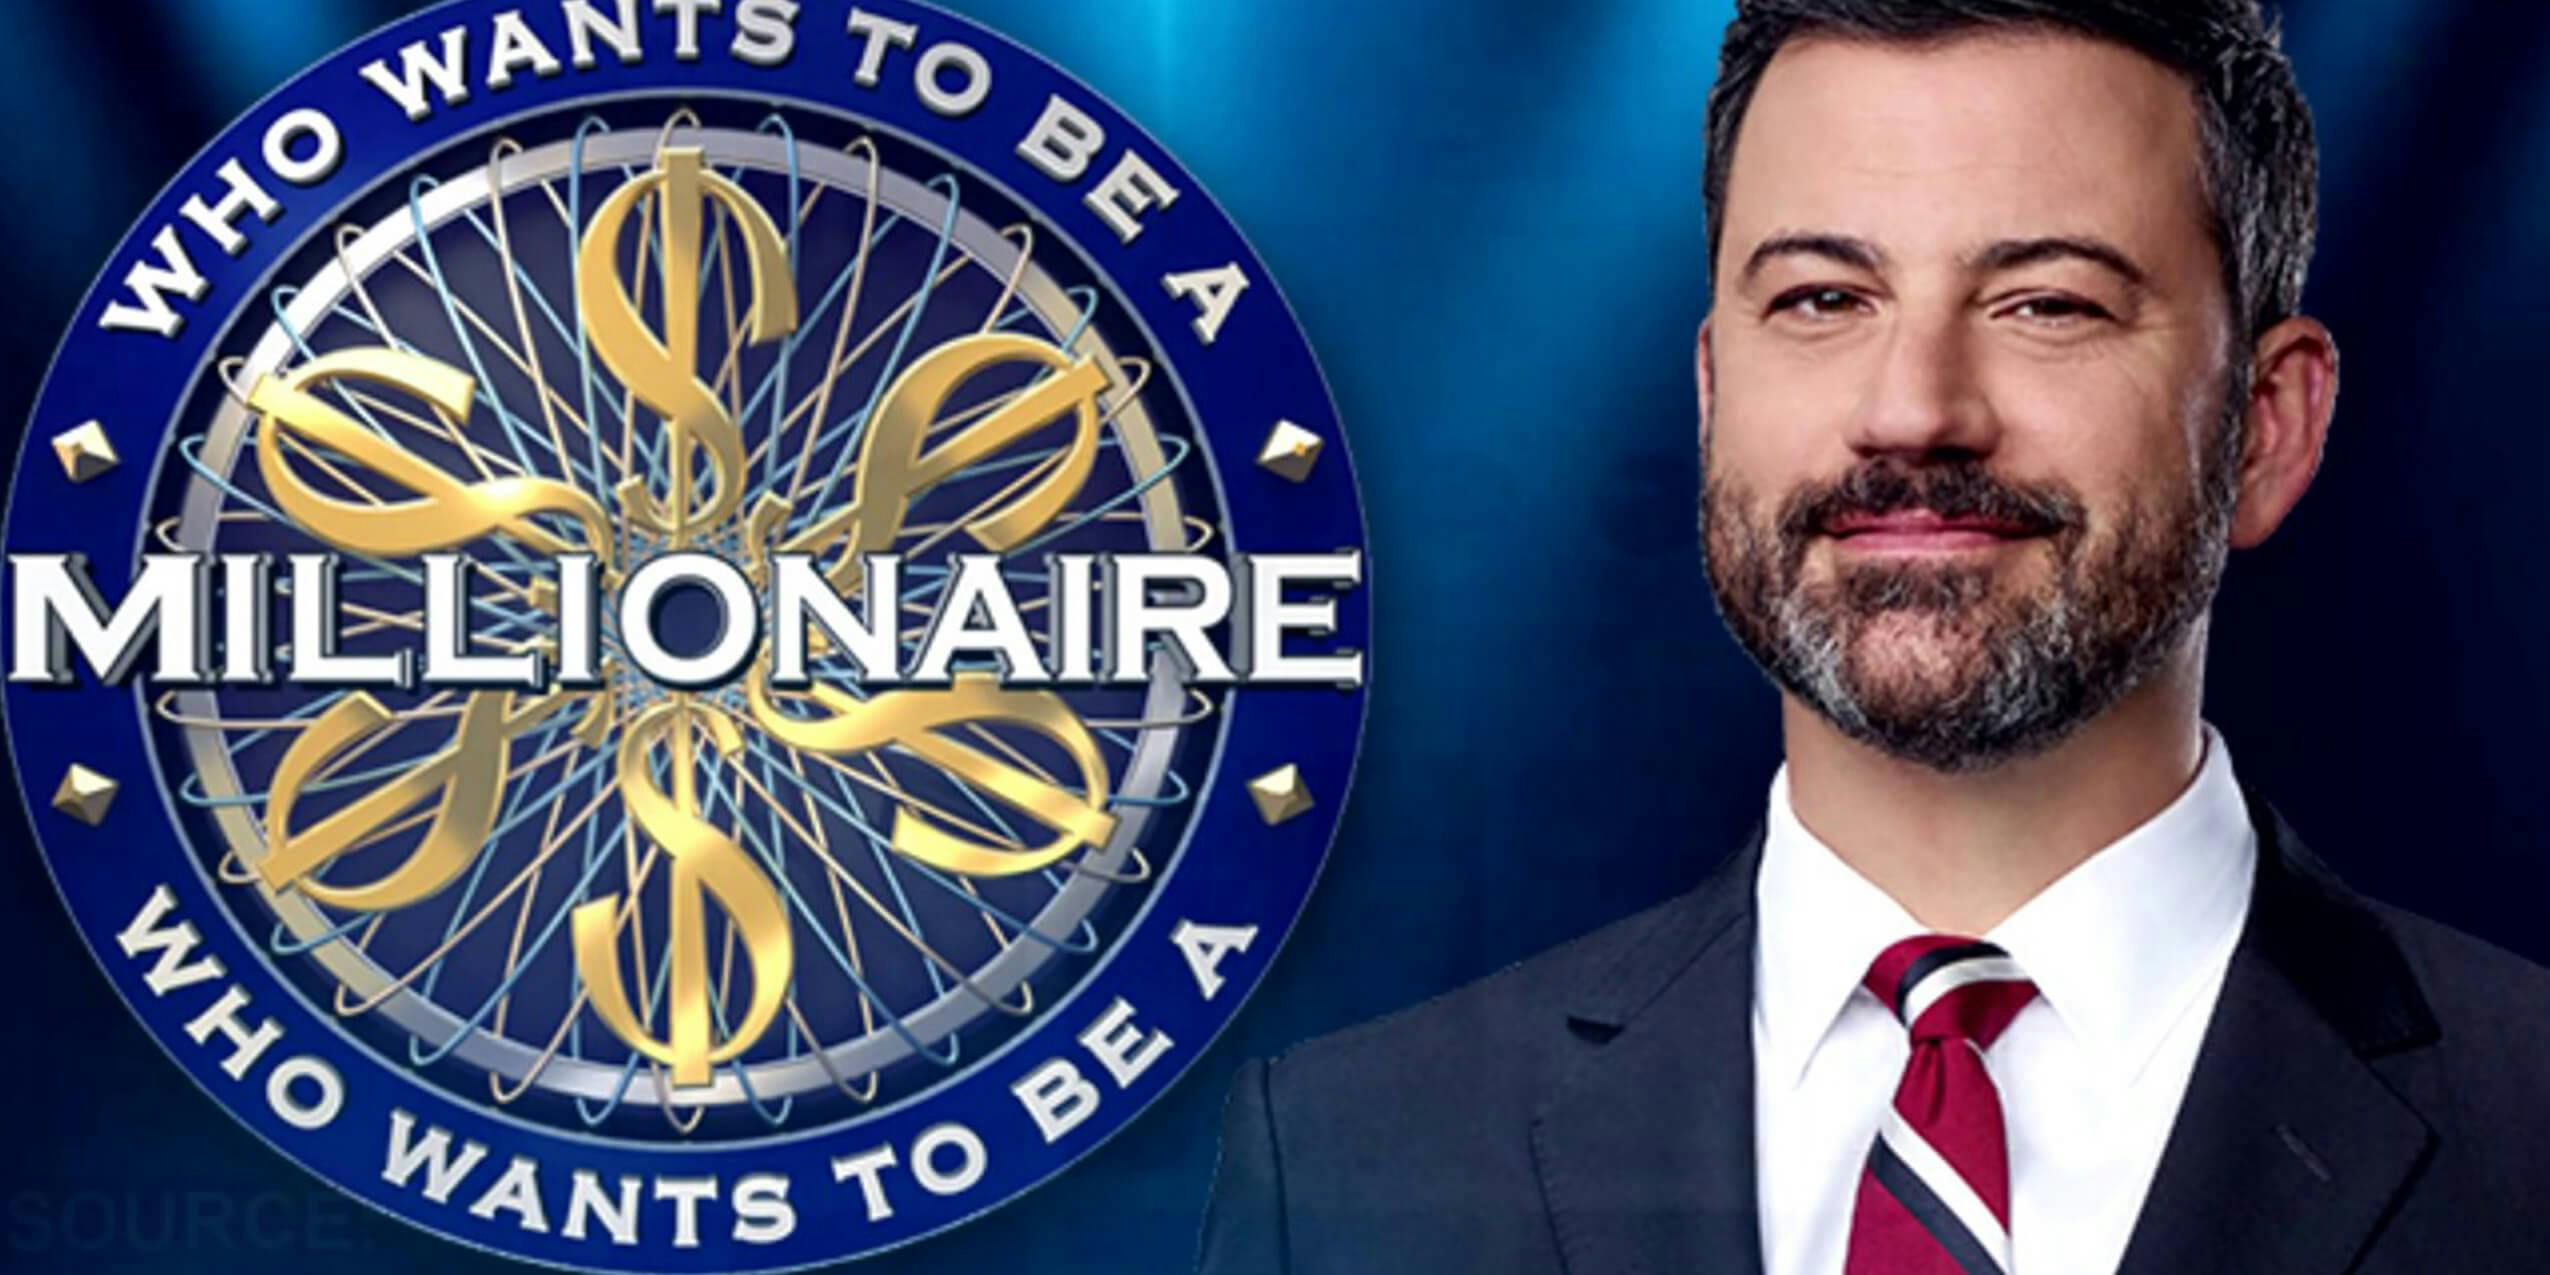 stream who wants to be a millionaire